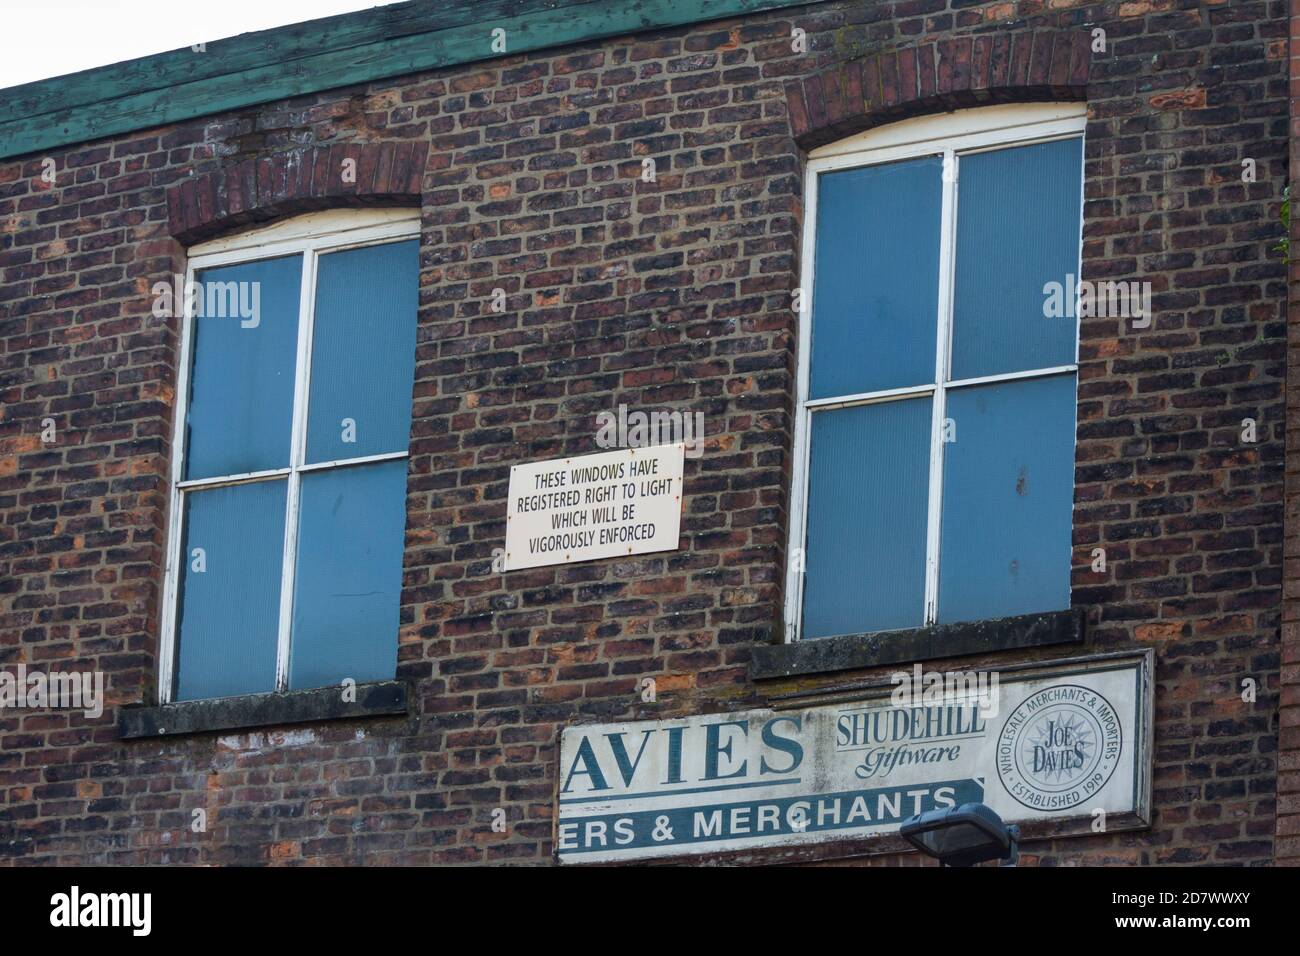 A sign proclaiming a registered windows Right to Lights sign on the grade II listed 19th century commercial building at 29 Shudehill, Manchester. Stock Photo